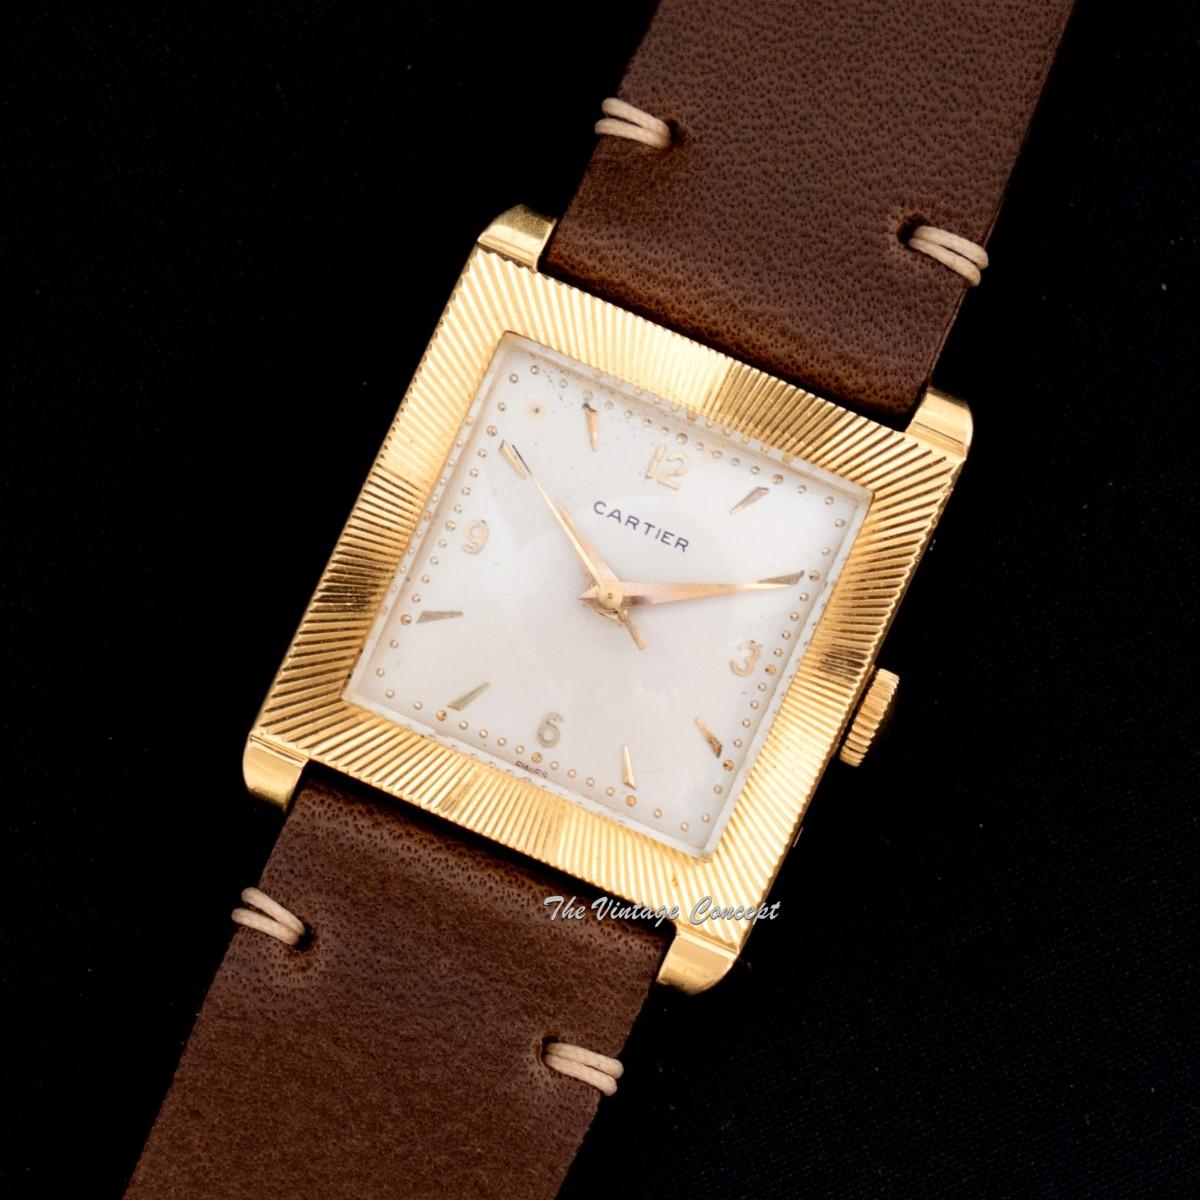 Cartier 18K YG Square 3,6,9 Indexes Dial